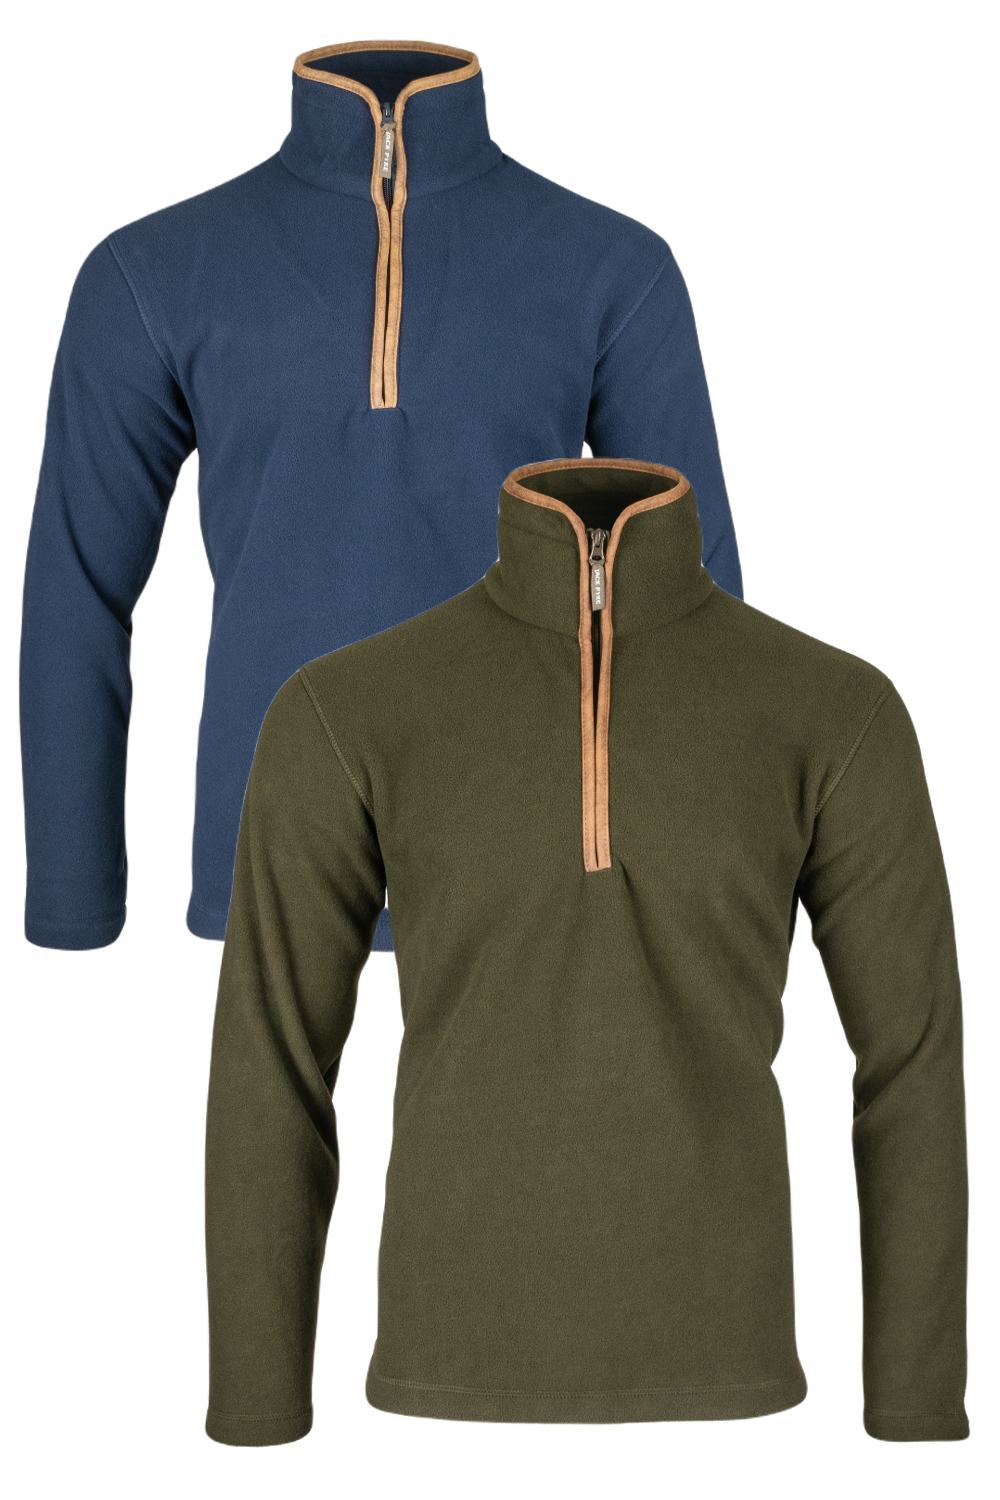 Jack Pyke Countryman Fleece Pullover in Navy and Dark Olive 